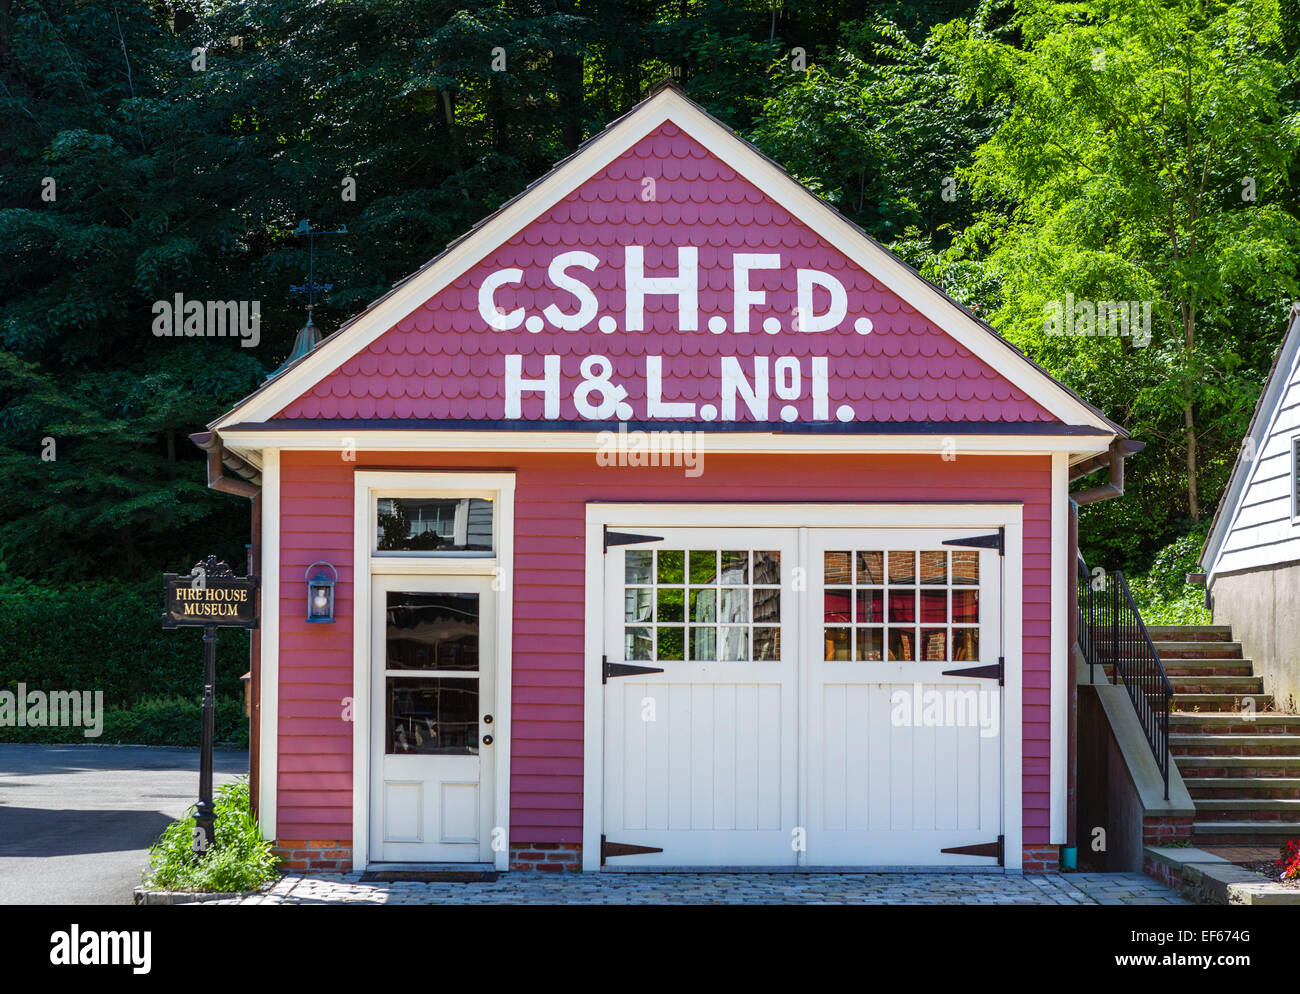 The Fire House Museum in Cold Spring Harbor, Huntington, Suffolk County, Long Island , NY, USA Stock Photo